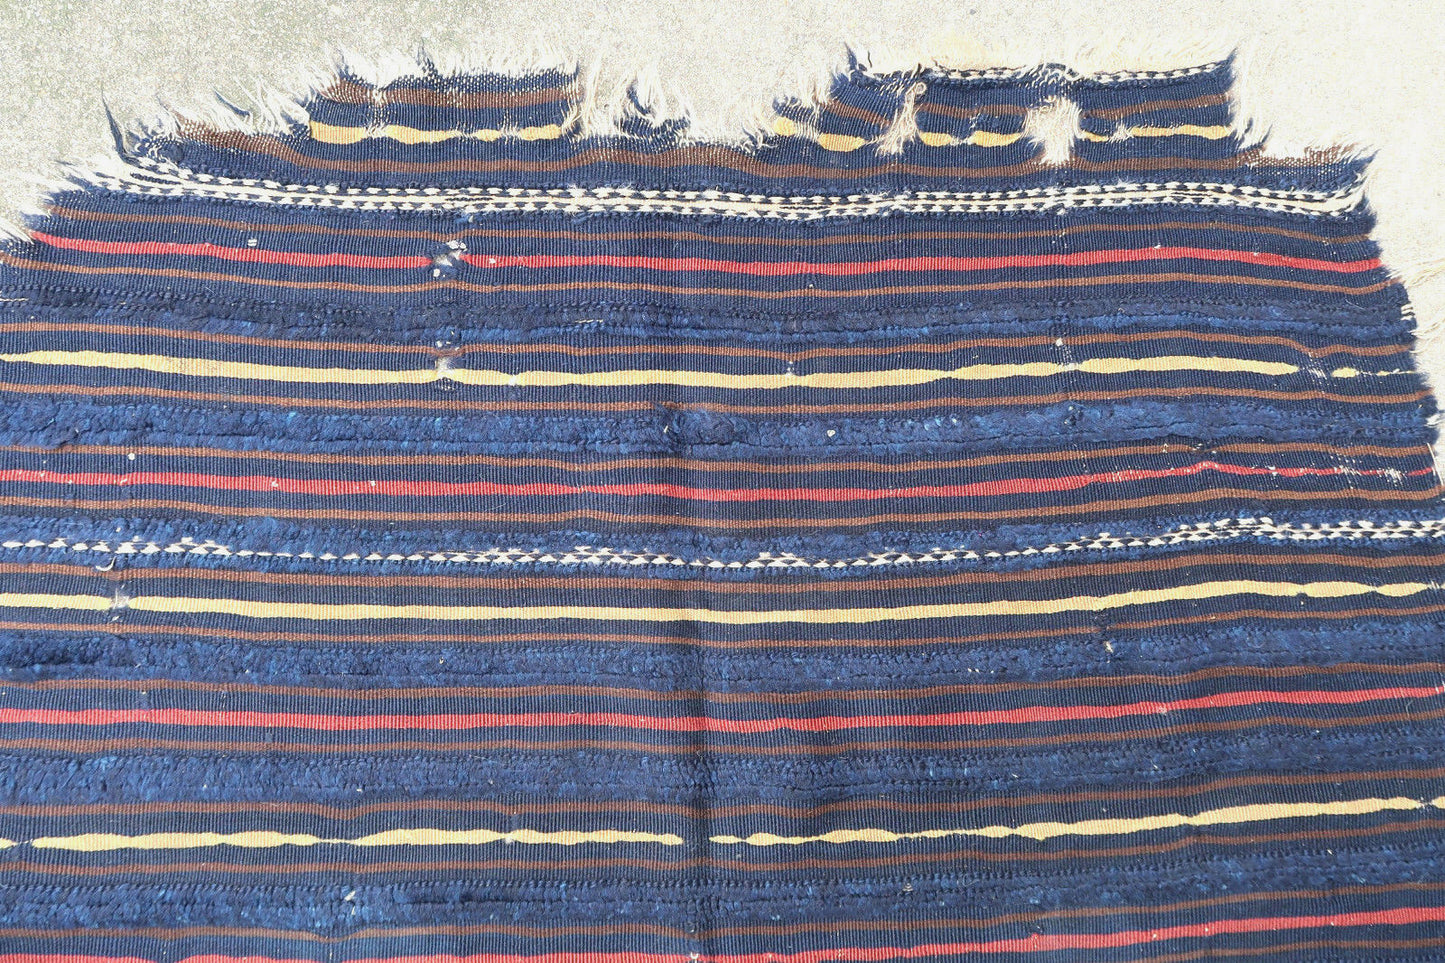 Handmade antique Berber handira from Morocco, Outat El Haj region. This piece is from the end of 19th century in original condition, it has some holes and wears. The kilim is collectible and made in wool.